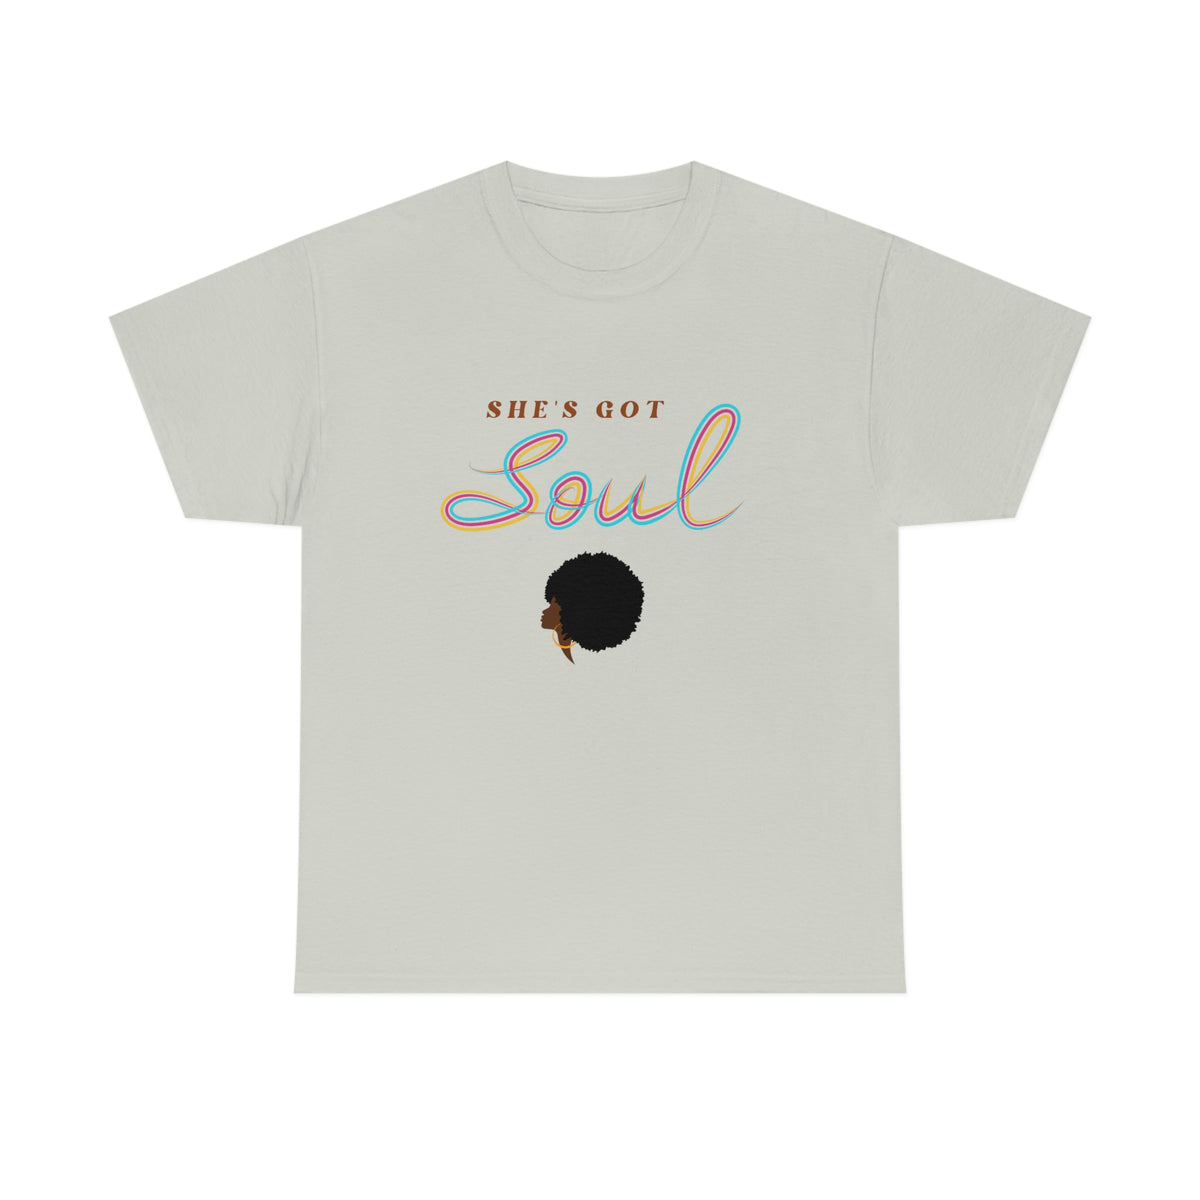 Shes Got Soul Tee, Soulful Top, Groovy Pullover, Cool Girl Top, Trendy Top, Soul Sister T Shirt